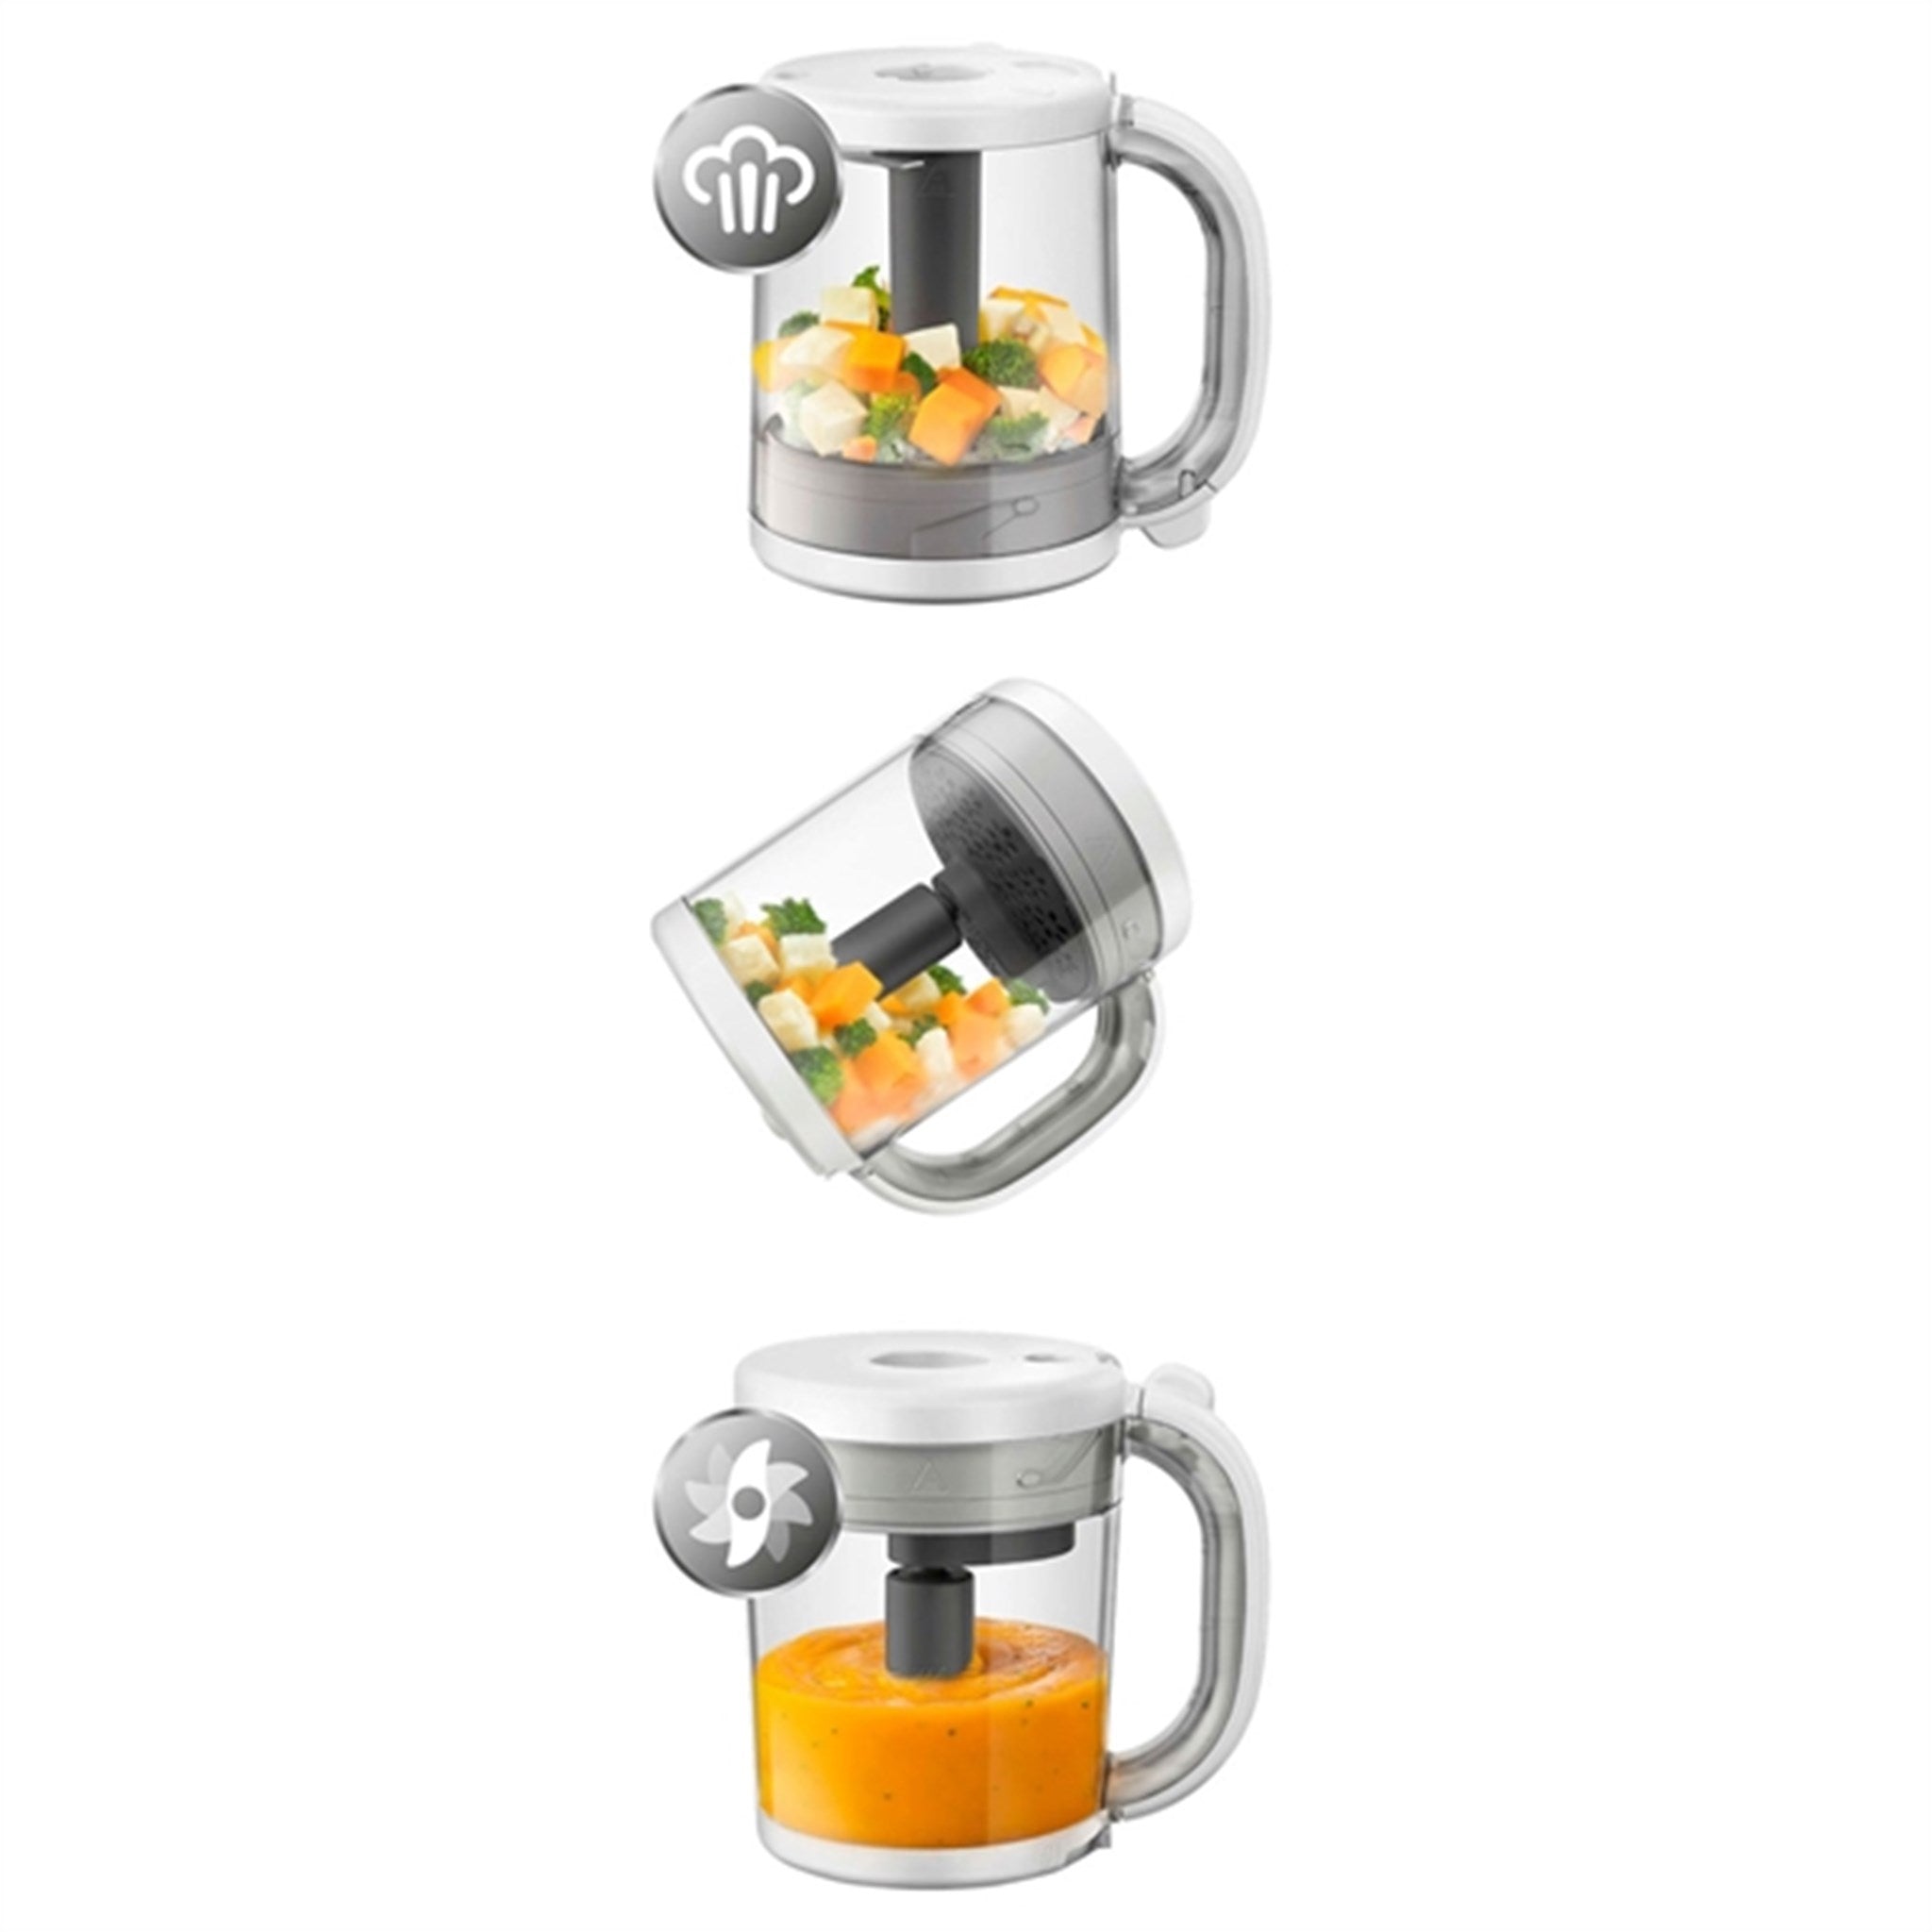 Philips Avent 4-in-1 Baby Food Processor For Healthy Food 2